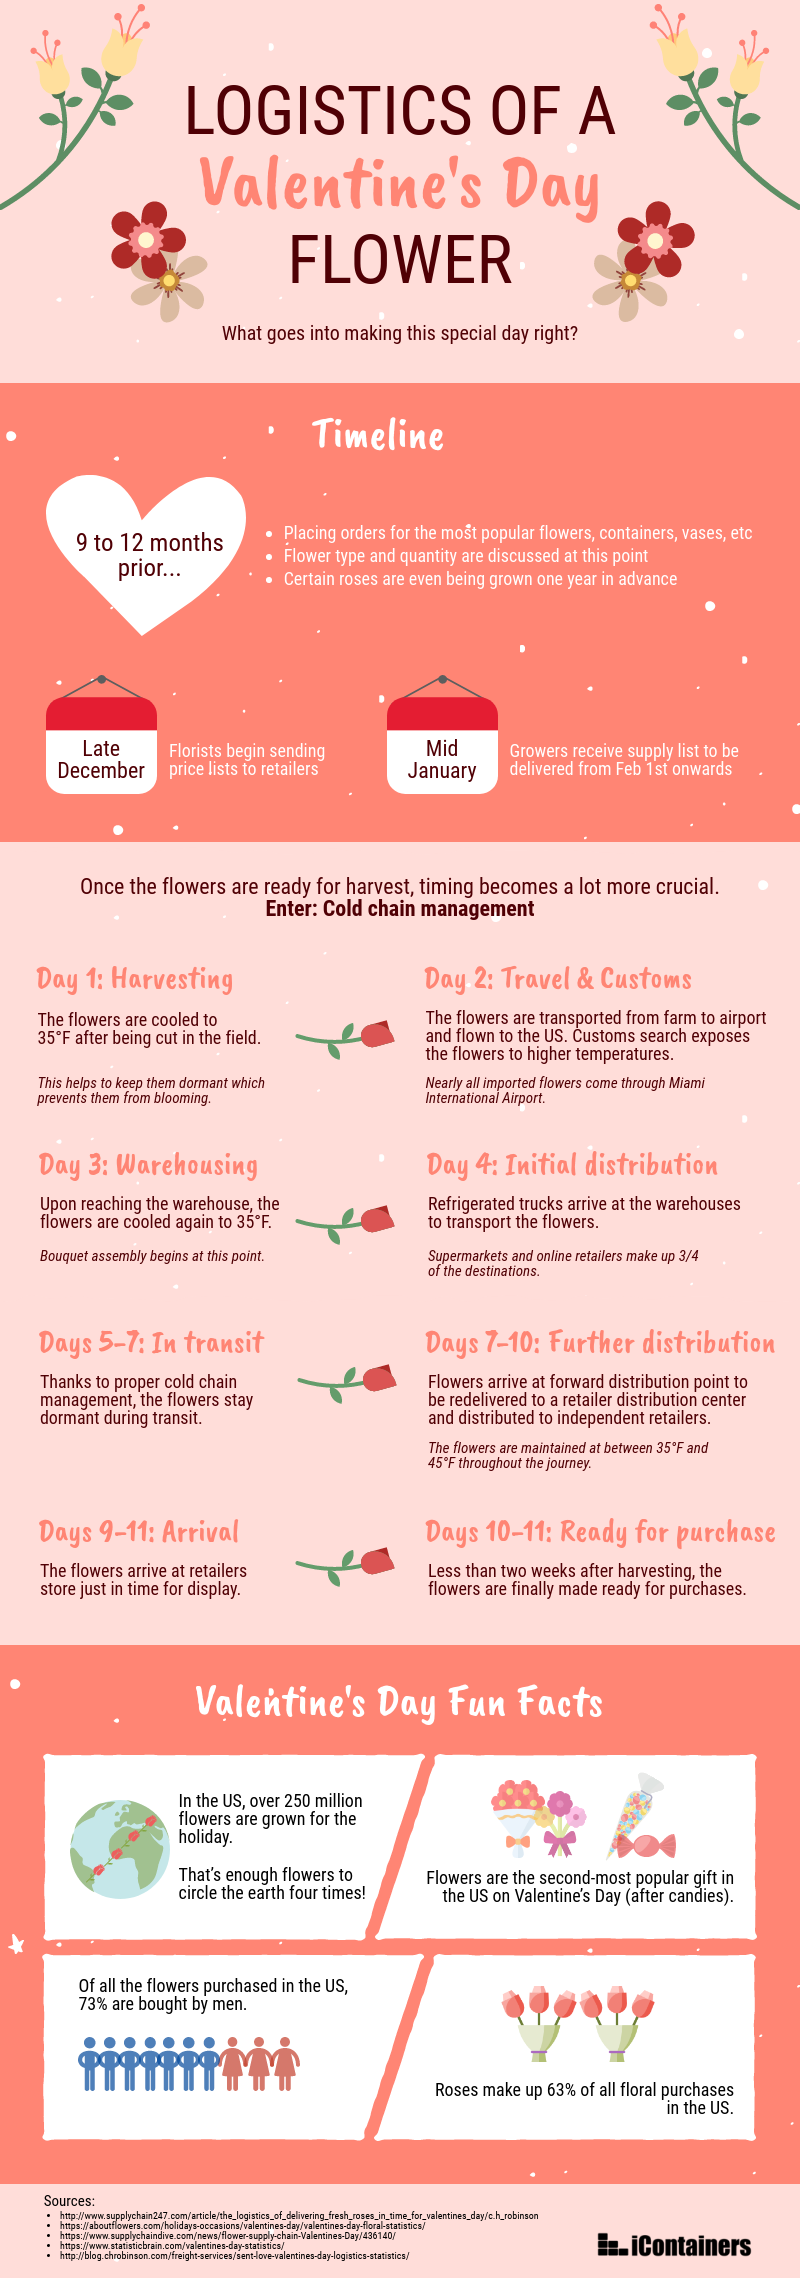 Valentine's Day Logistics | iContainers